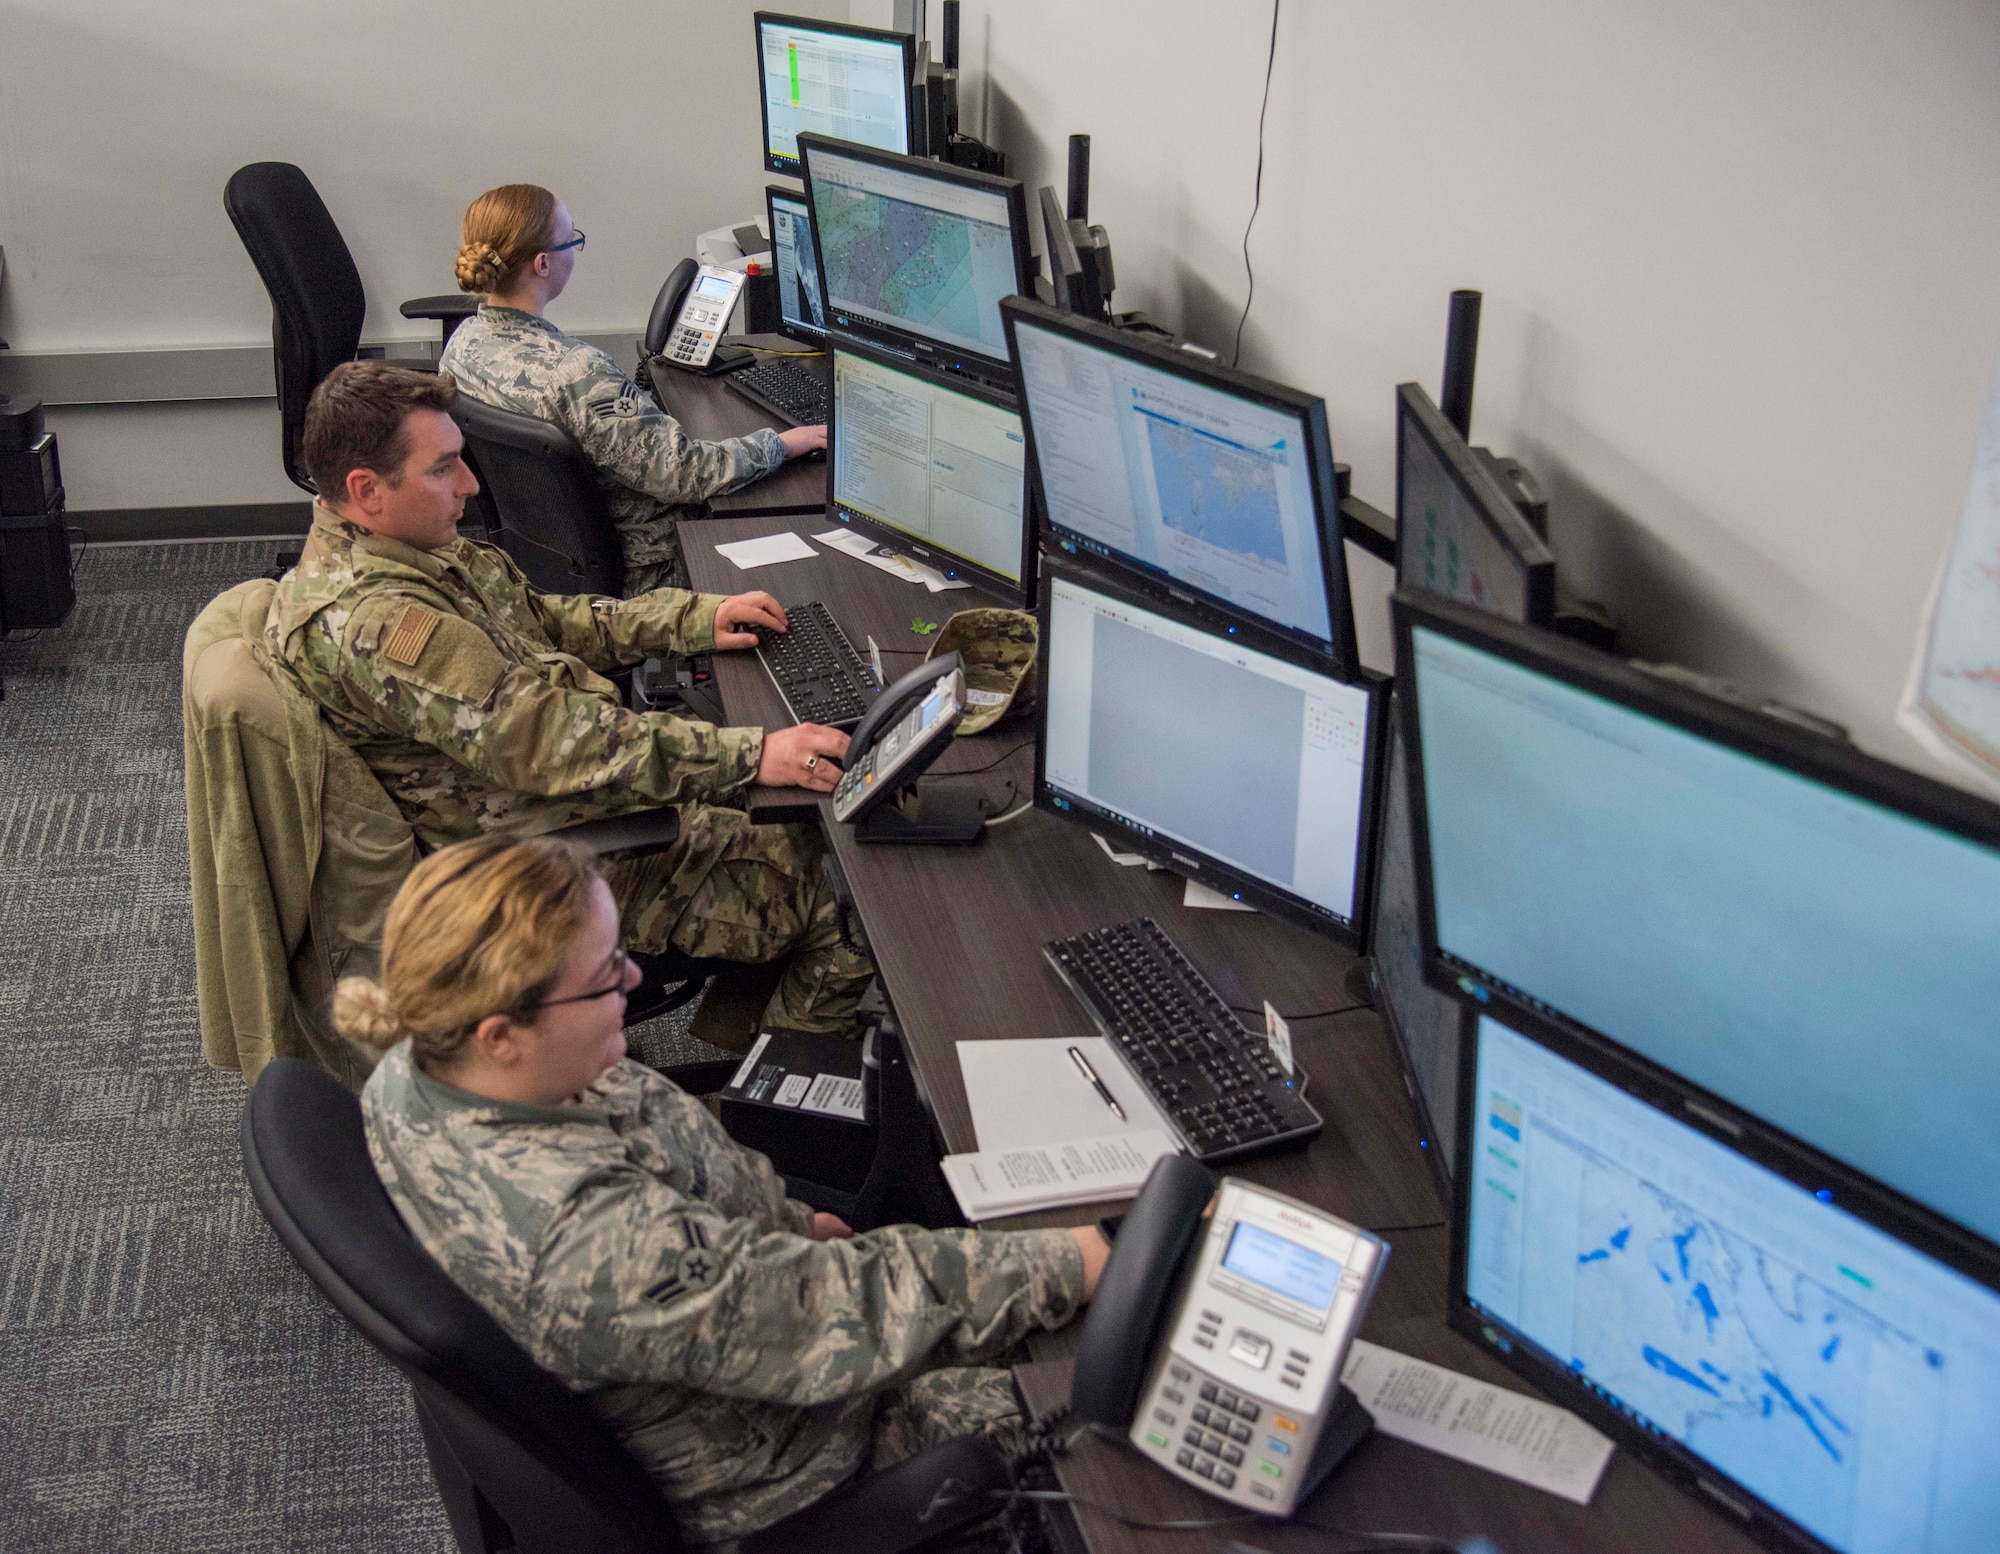 Airmen from the 15th Operational Weather Squadron monitor weather systems and patterns to help them better forecast upcoming weather that might affect various bases and their missions. The 15th OWS monitors weather to brief pilots about weather they might experience on their upcoming flight and send severe weather alerts to military bases if necessary. (U.S. Air Force photo by Airman 1st Class Nathaniel Hudson)